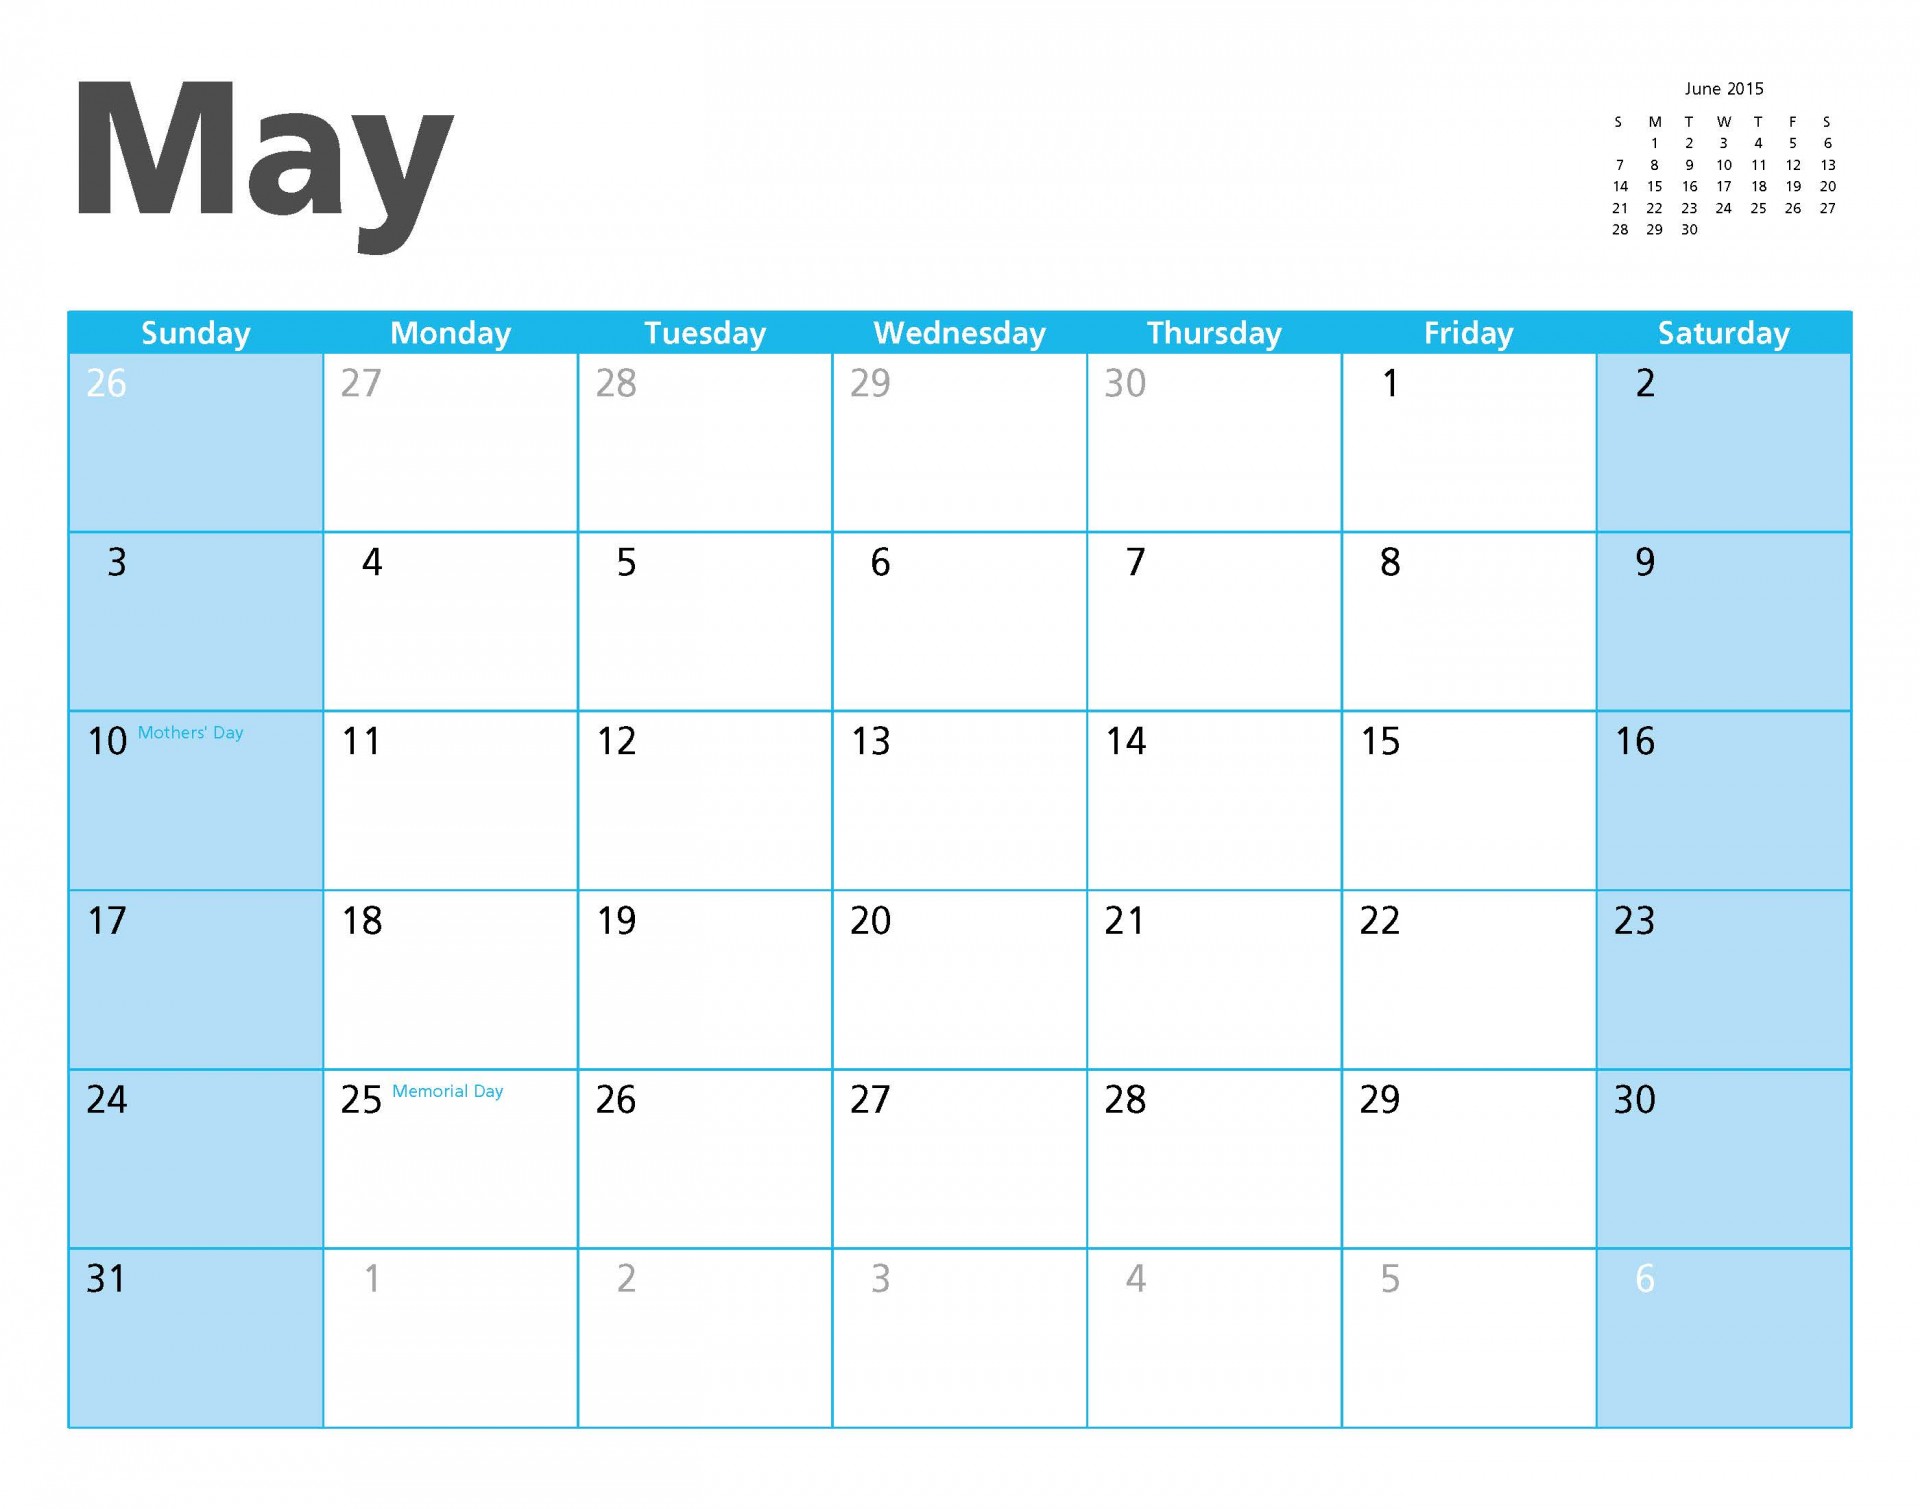 May 2015 Calendar Page - I really appreciate your premium download!